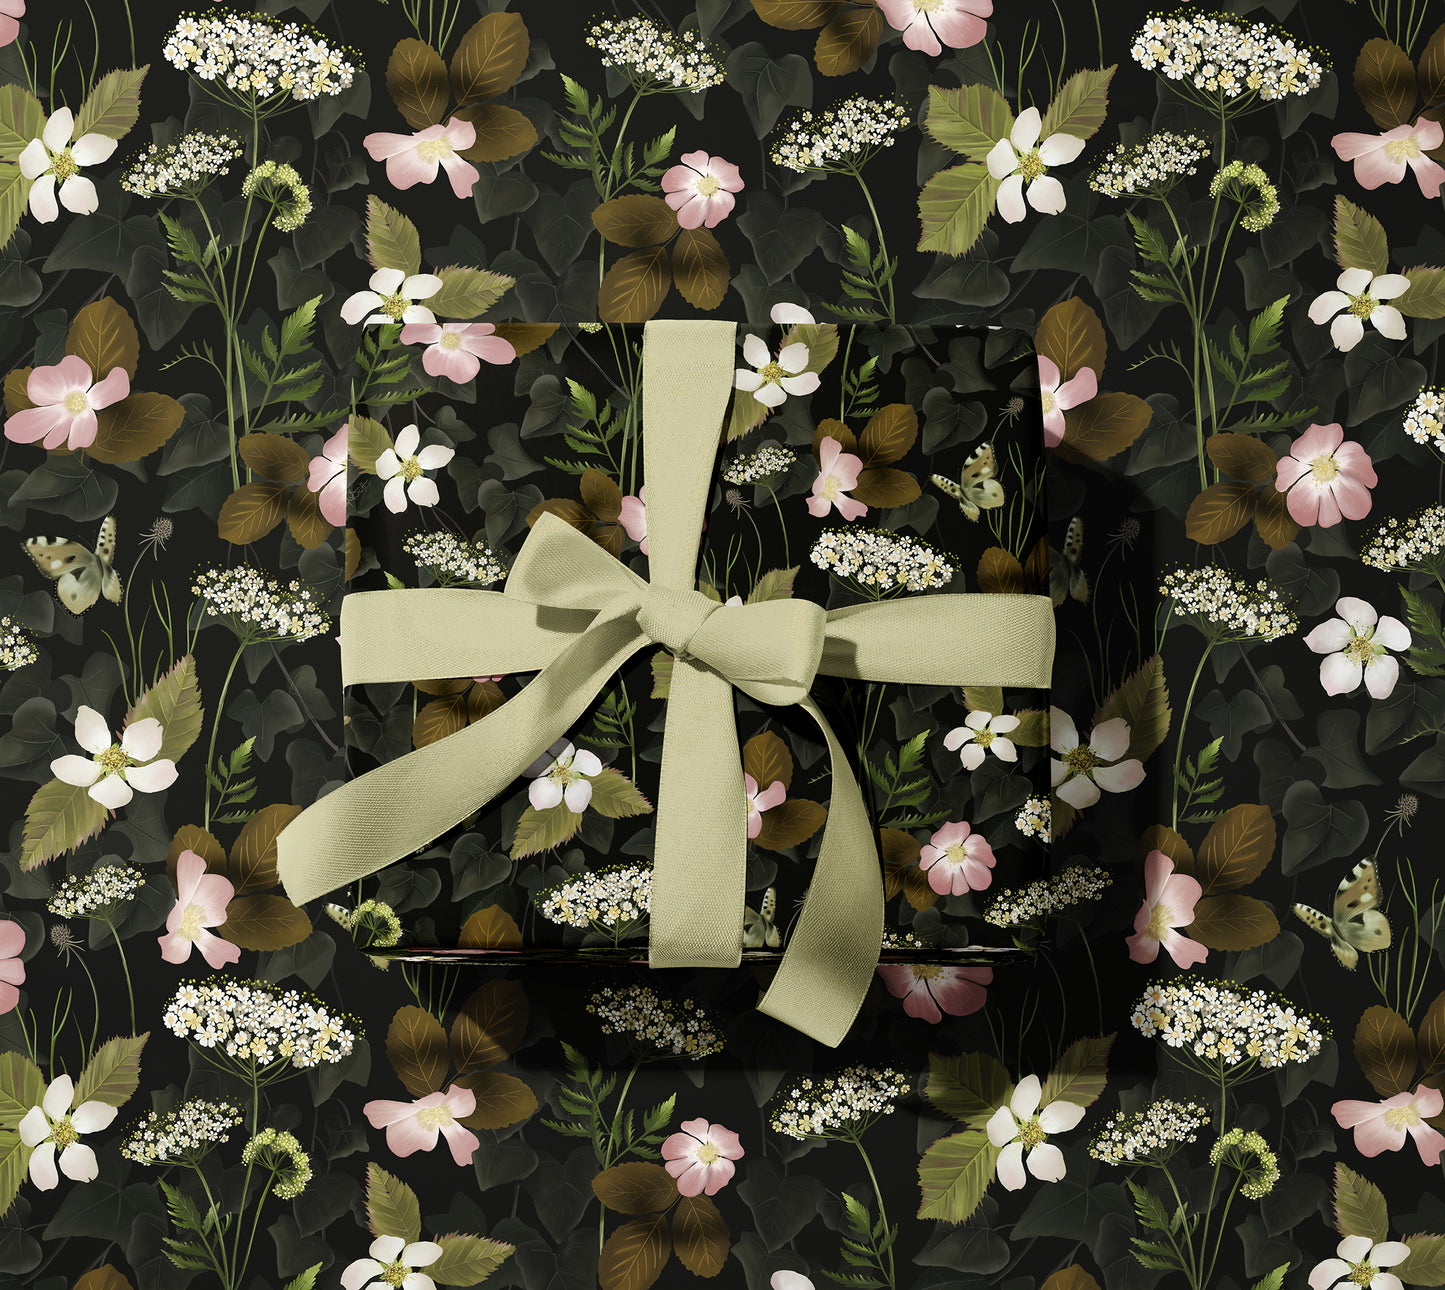 Bramble Floral Wrapping Paper in Evergreen - 5 Sheets